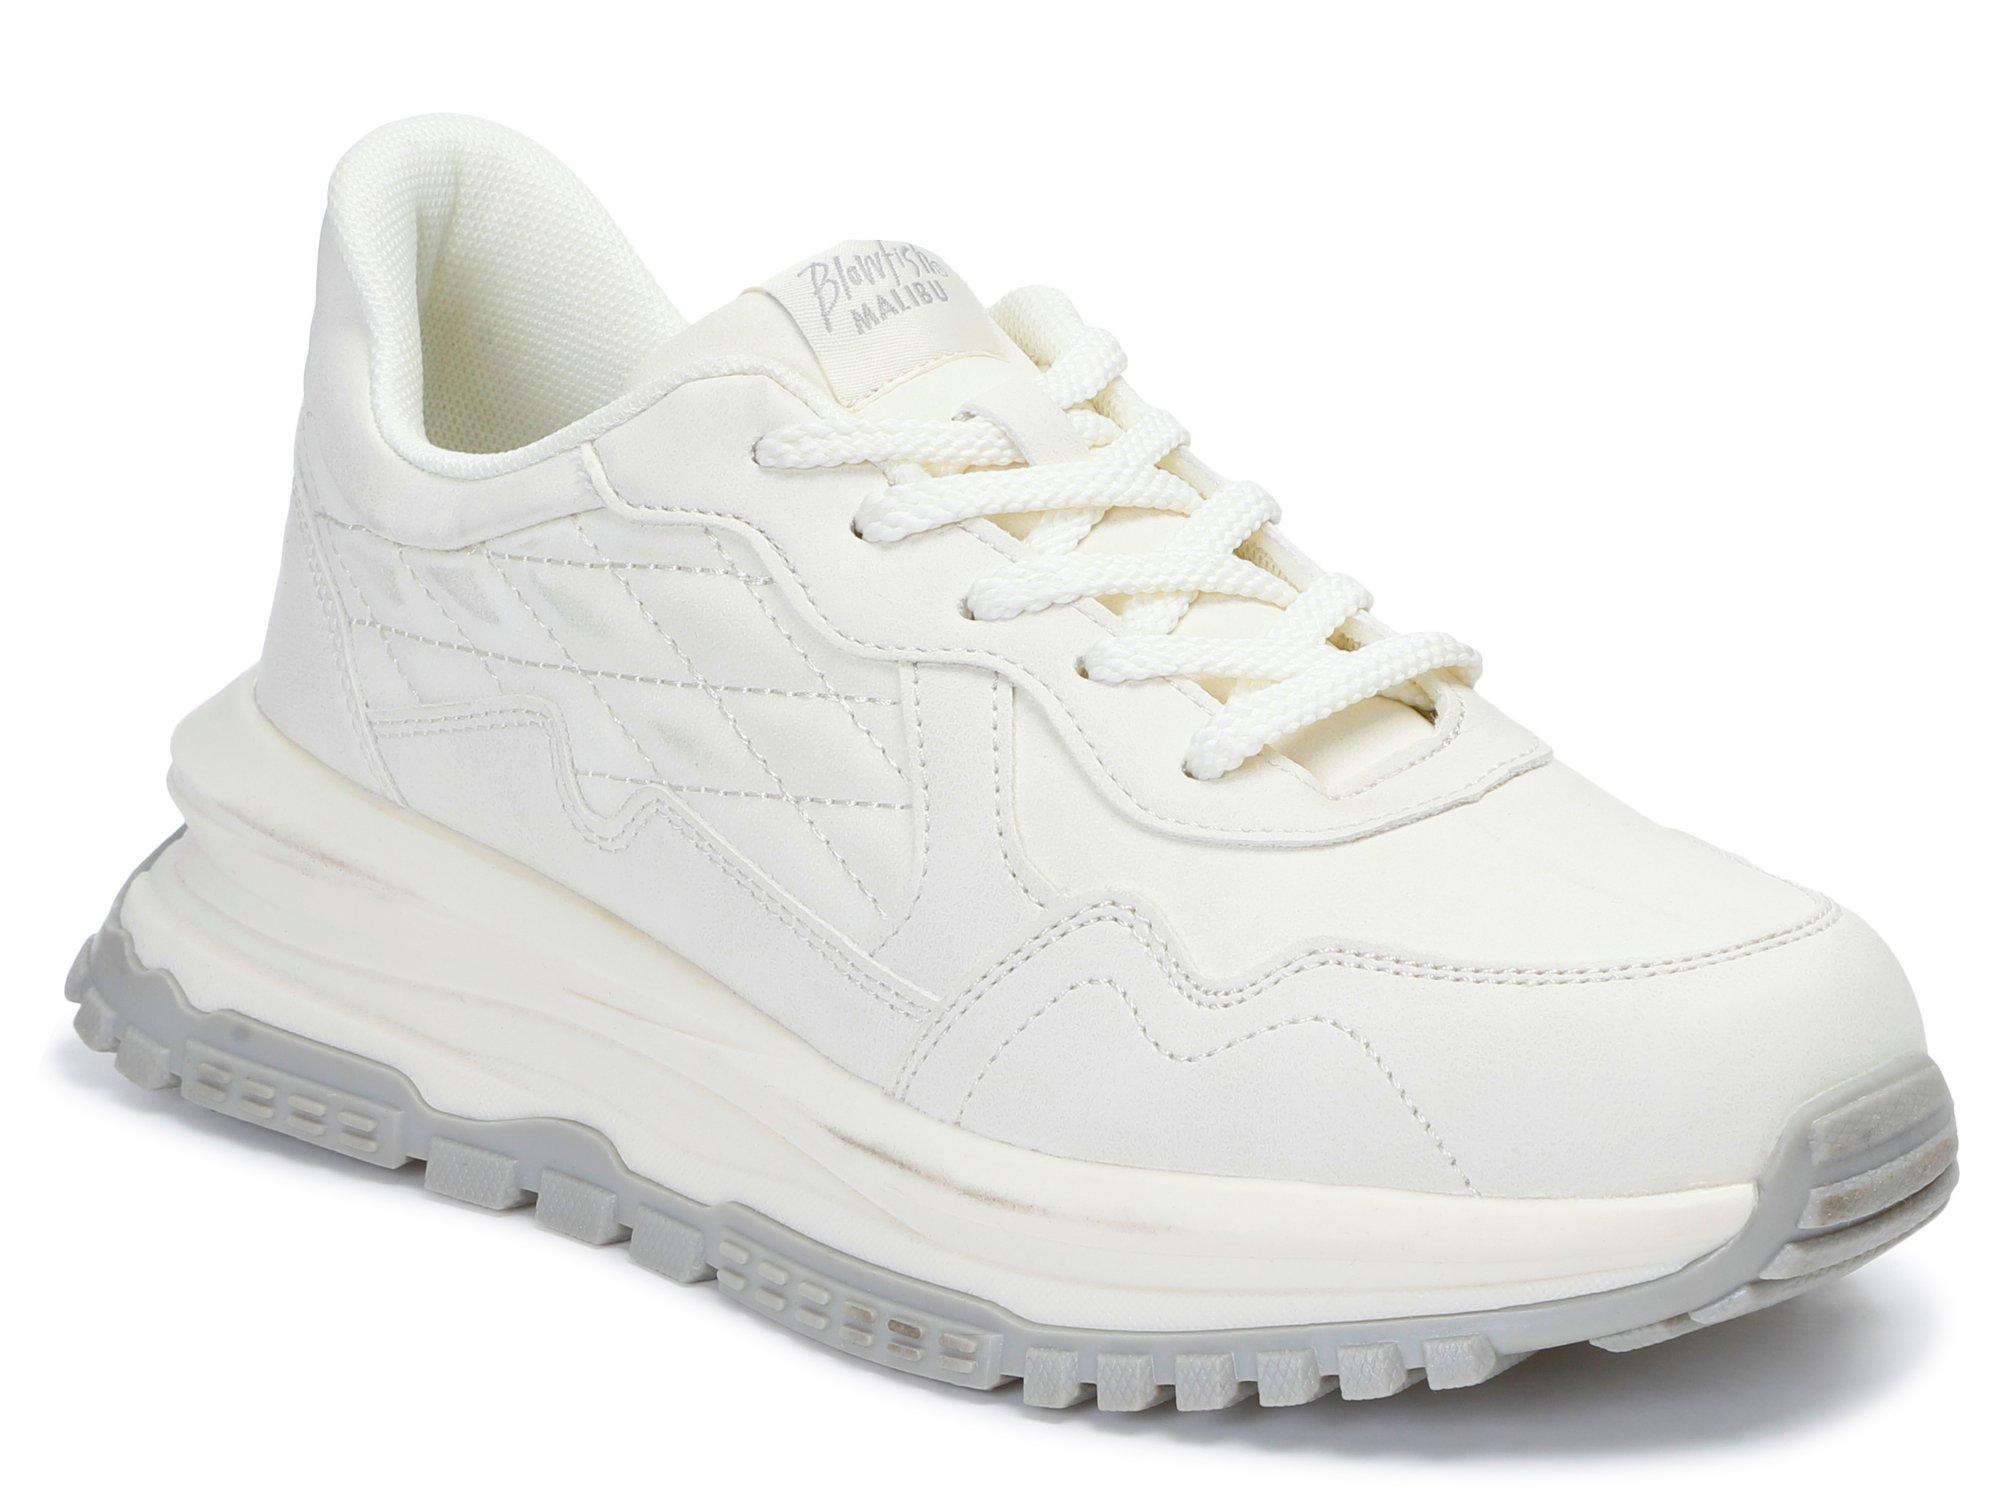 Women's Solid Faux Leather Sneakers